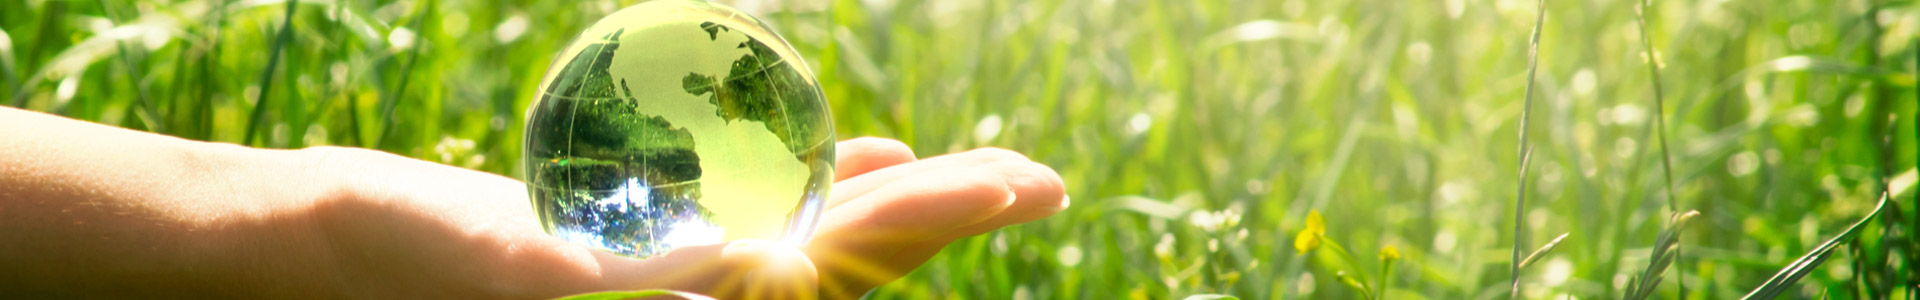 woman's hand holding a crystal globe in front of thick grass